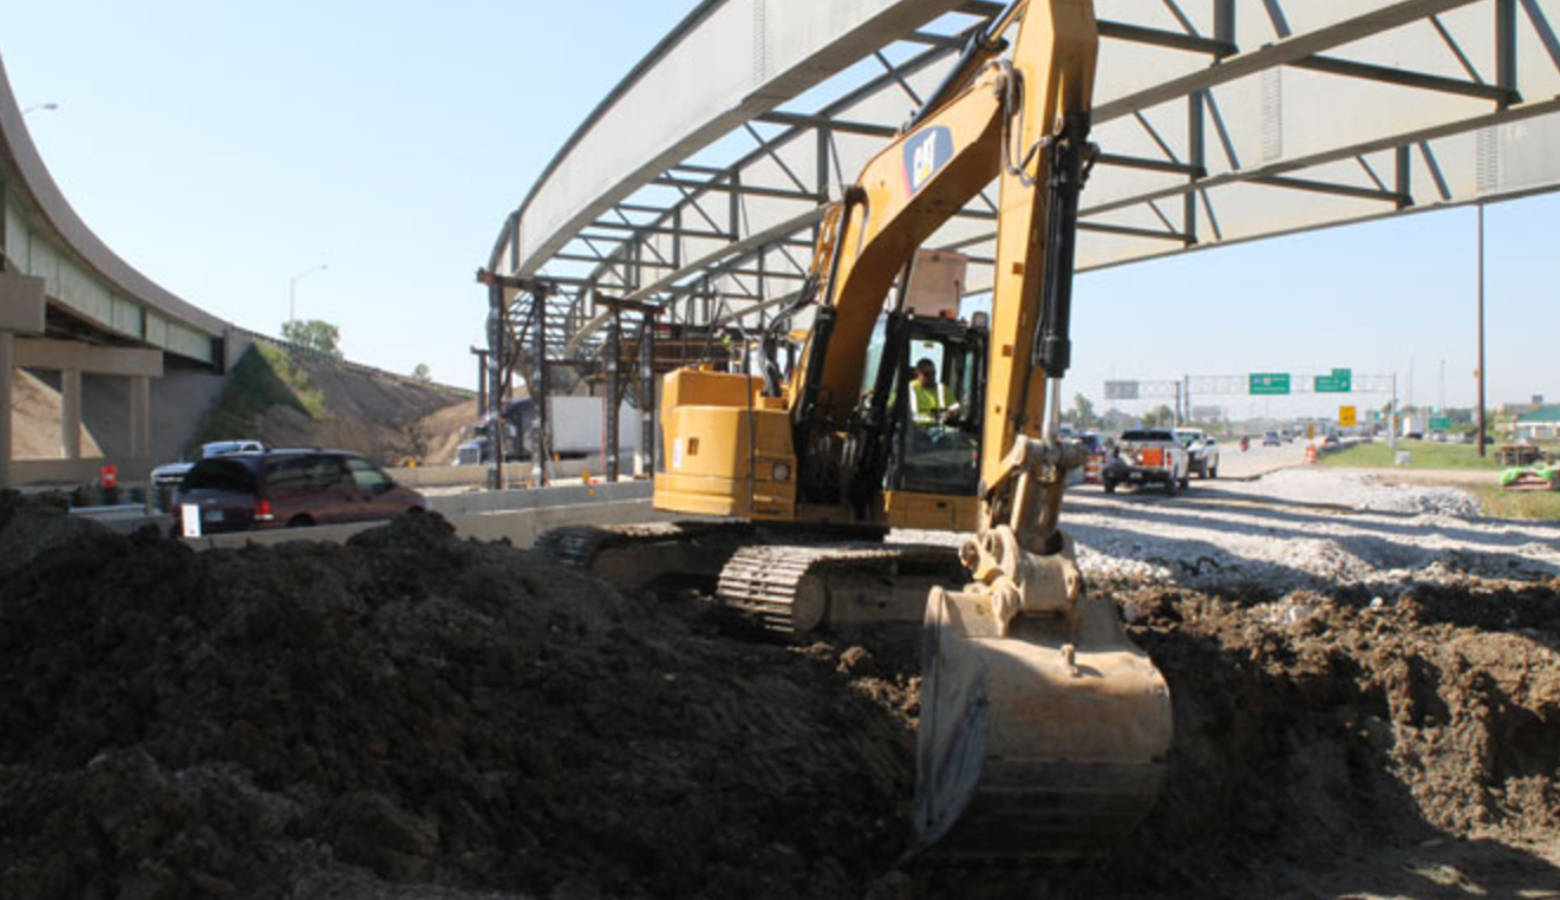 Interstate 69 construction near 116th Street in Fishers. (Indiana Department of Transportation)